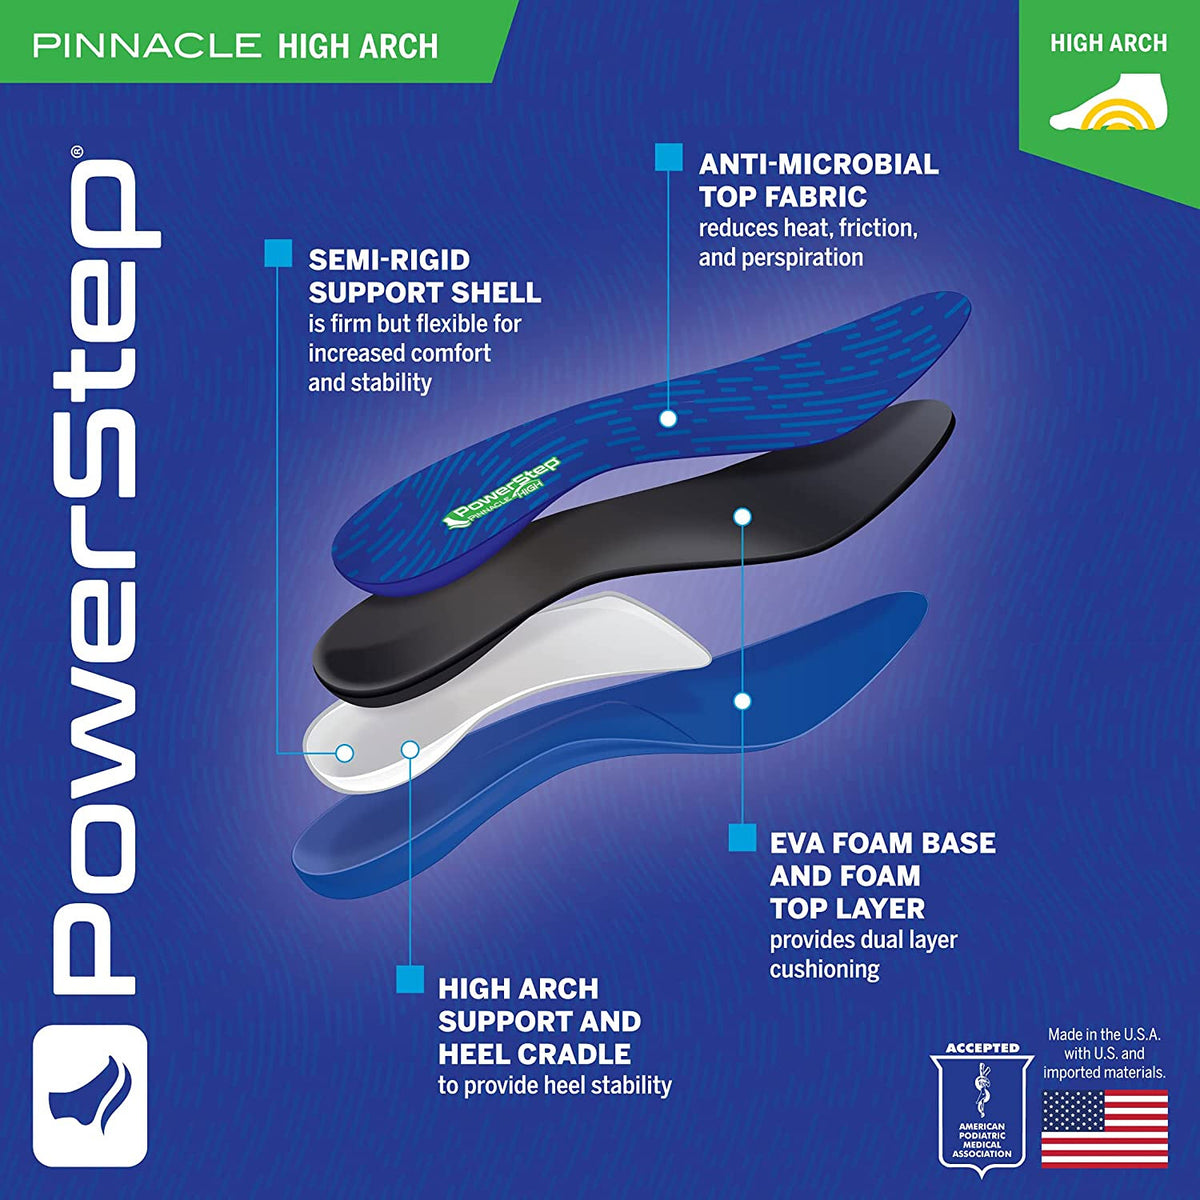 POWERSTEP PINNACLE HIGH ARCH REPLACEMENT INSOLE